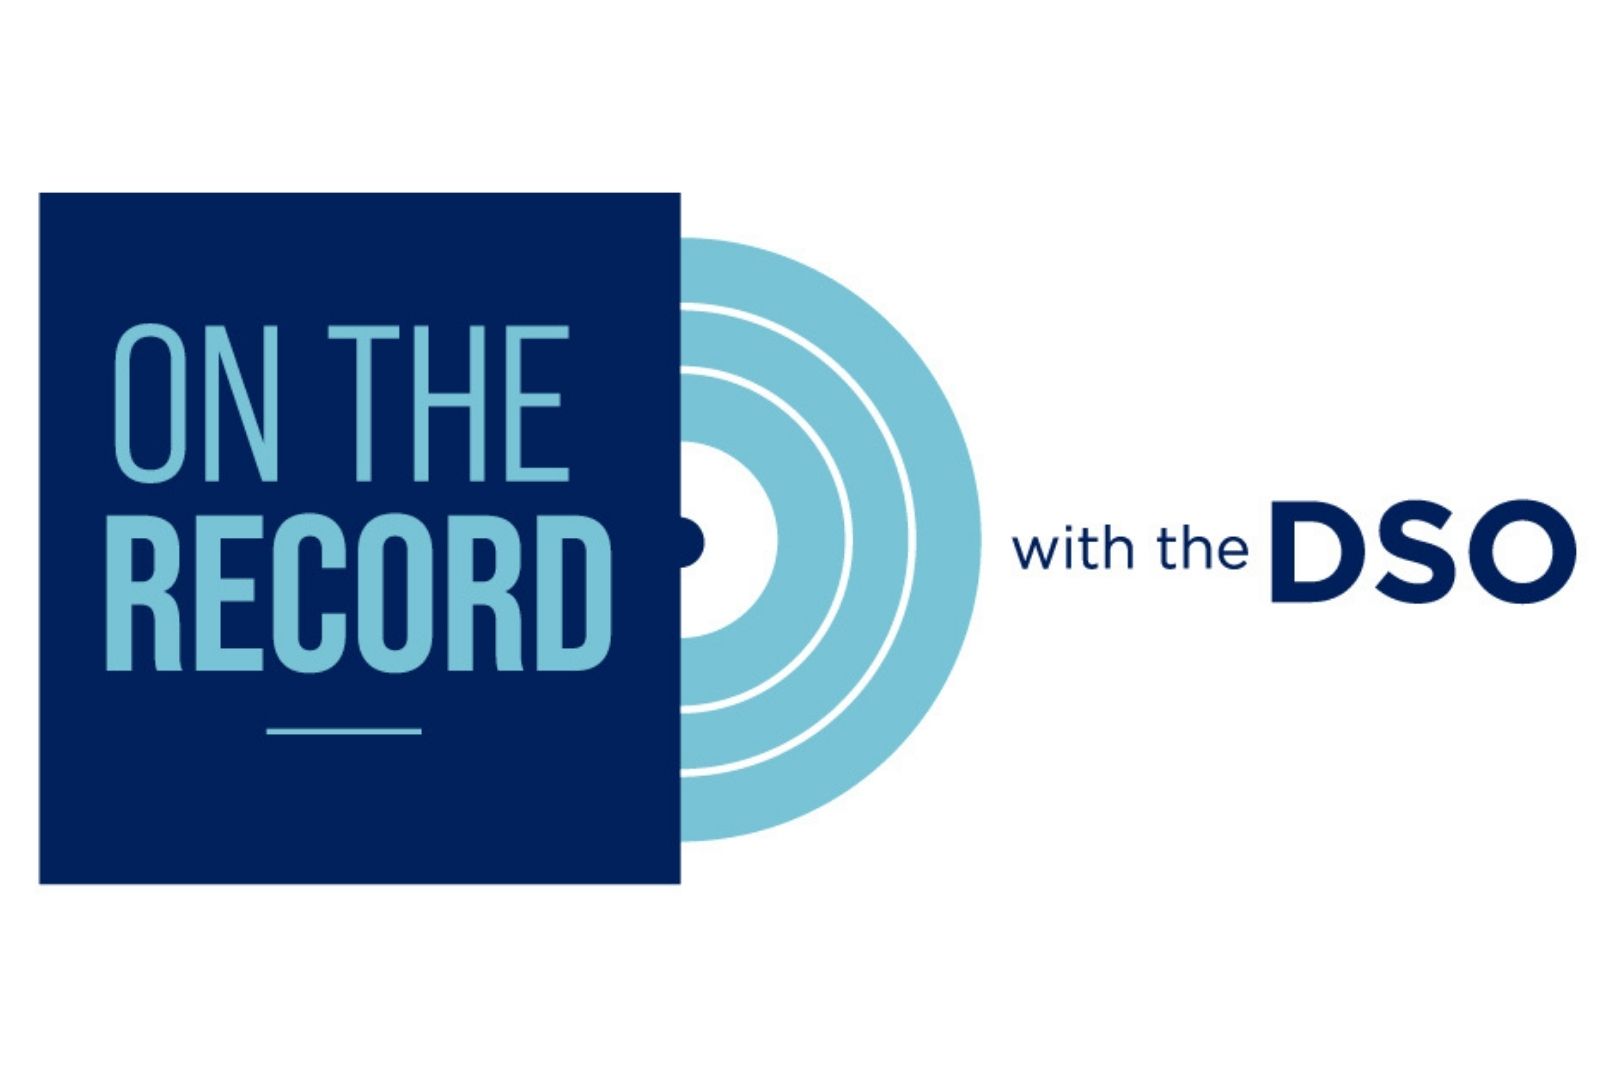 Logo for On the Record hosted by Sarah Kienle